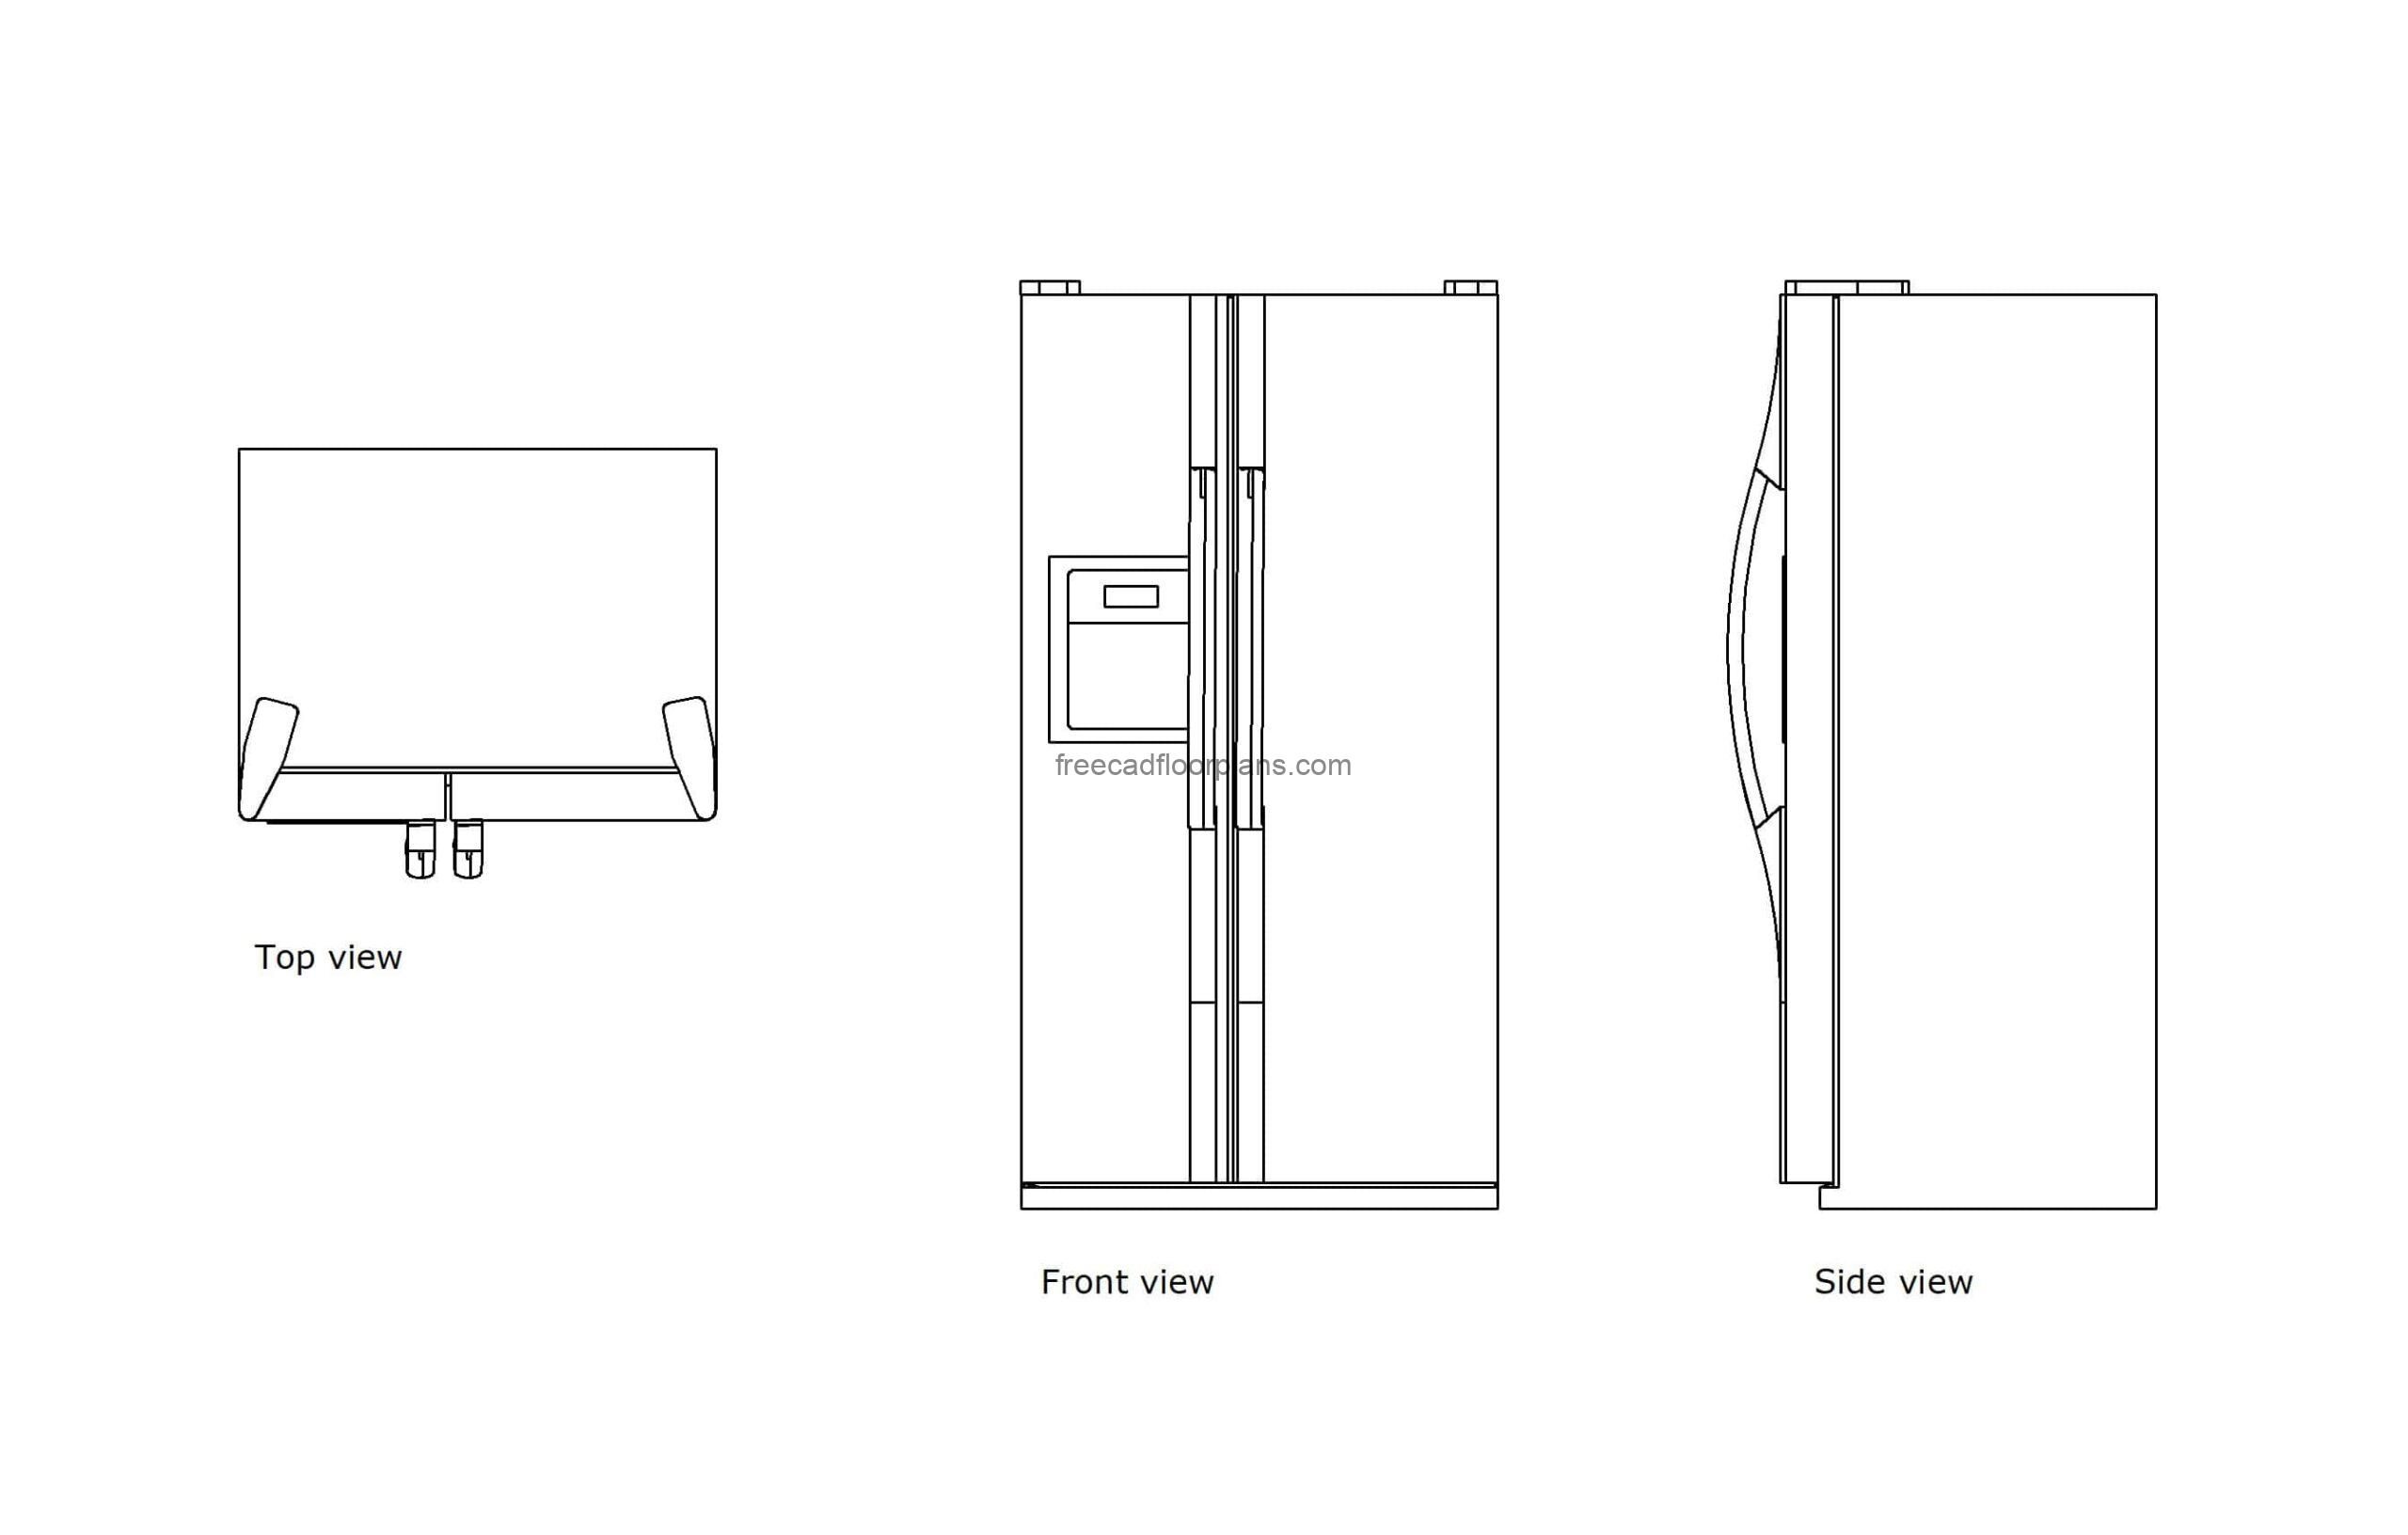 autocad drawing of a american fridge freezer, plan and elevation 2d views, dwg file free for download